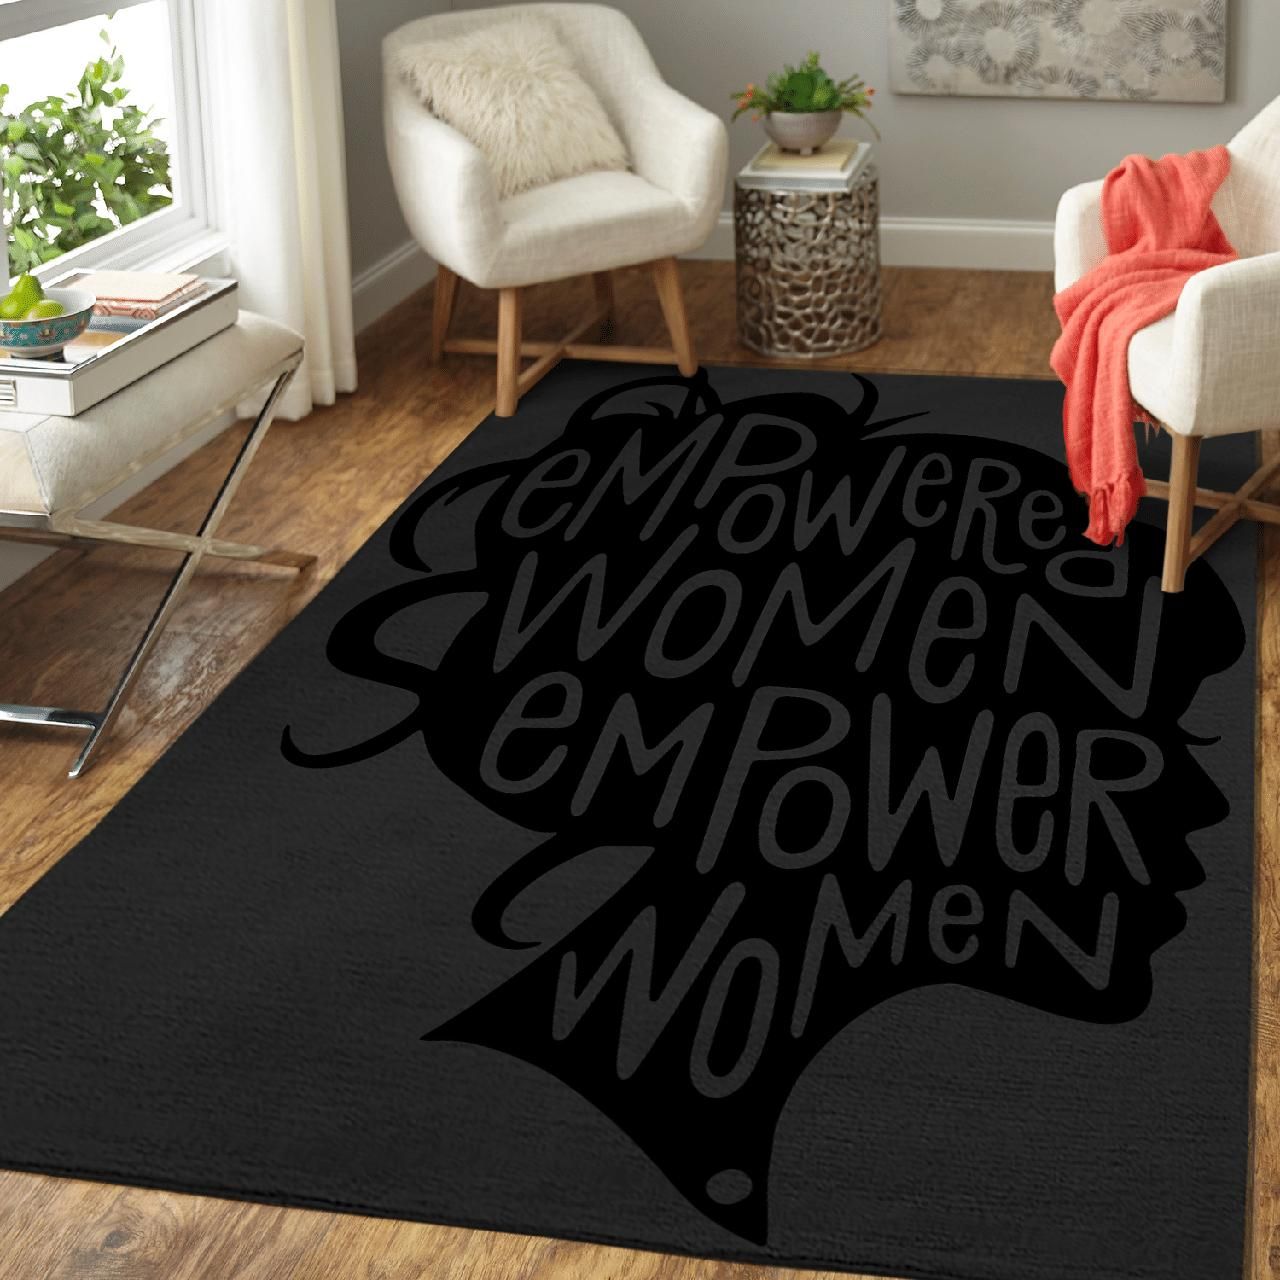 Feminist Empowered Women March Hot 2018 Area Rug